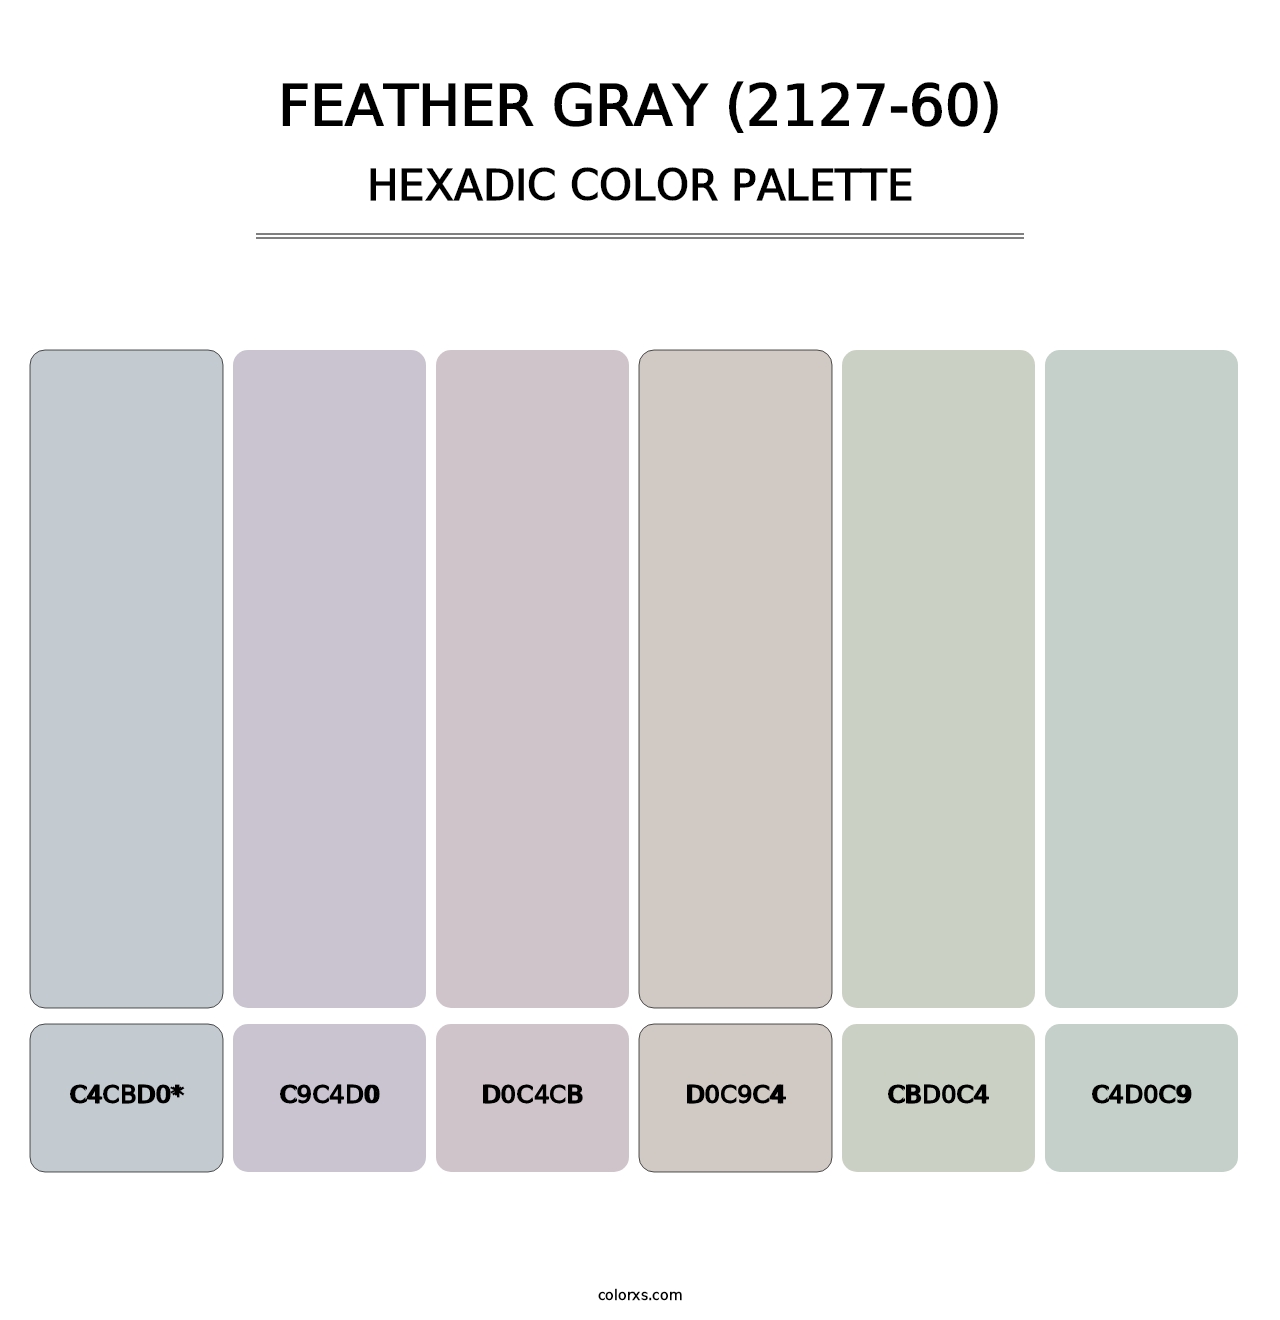 Feather Gray (2127-60) - Hexadic Color Palette